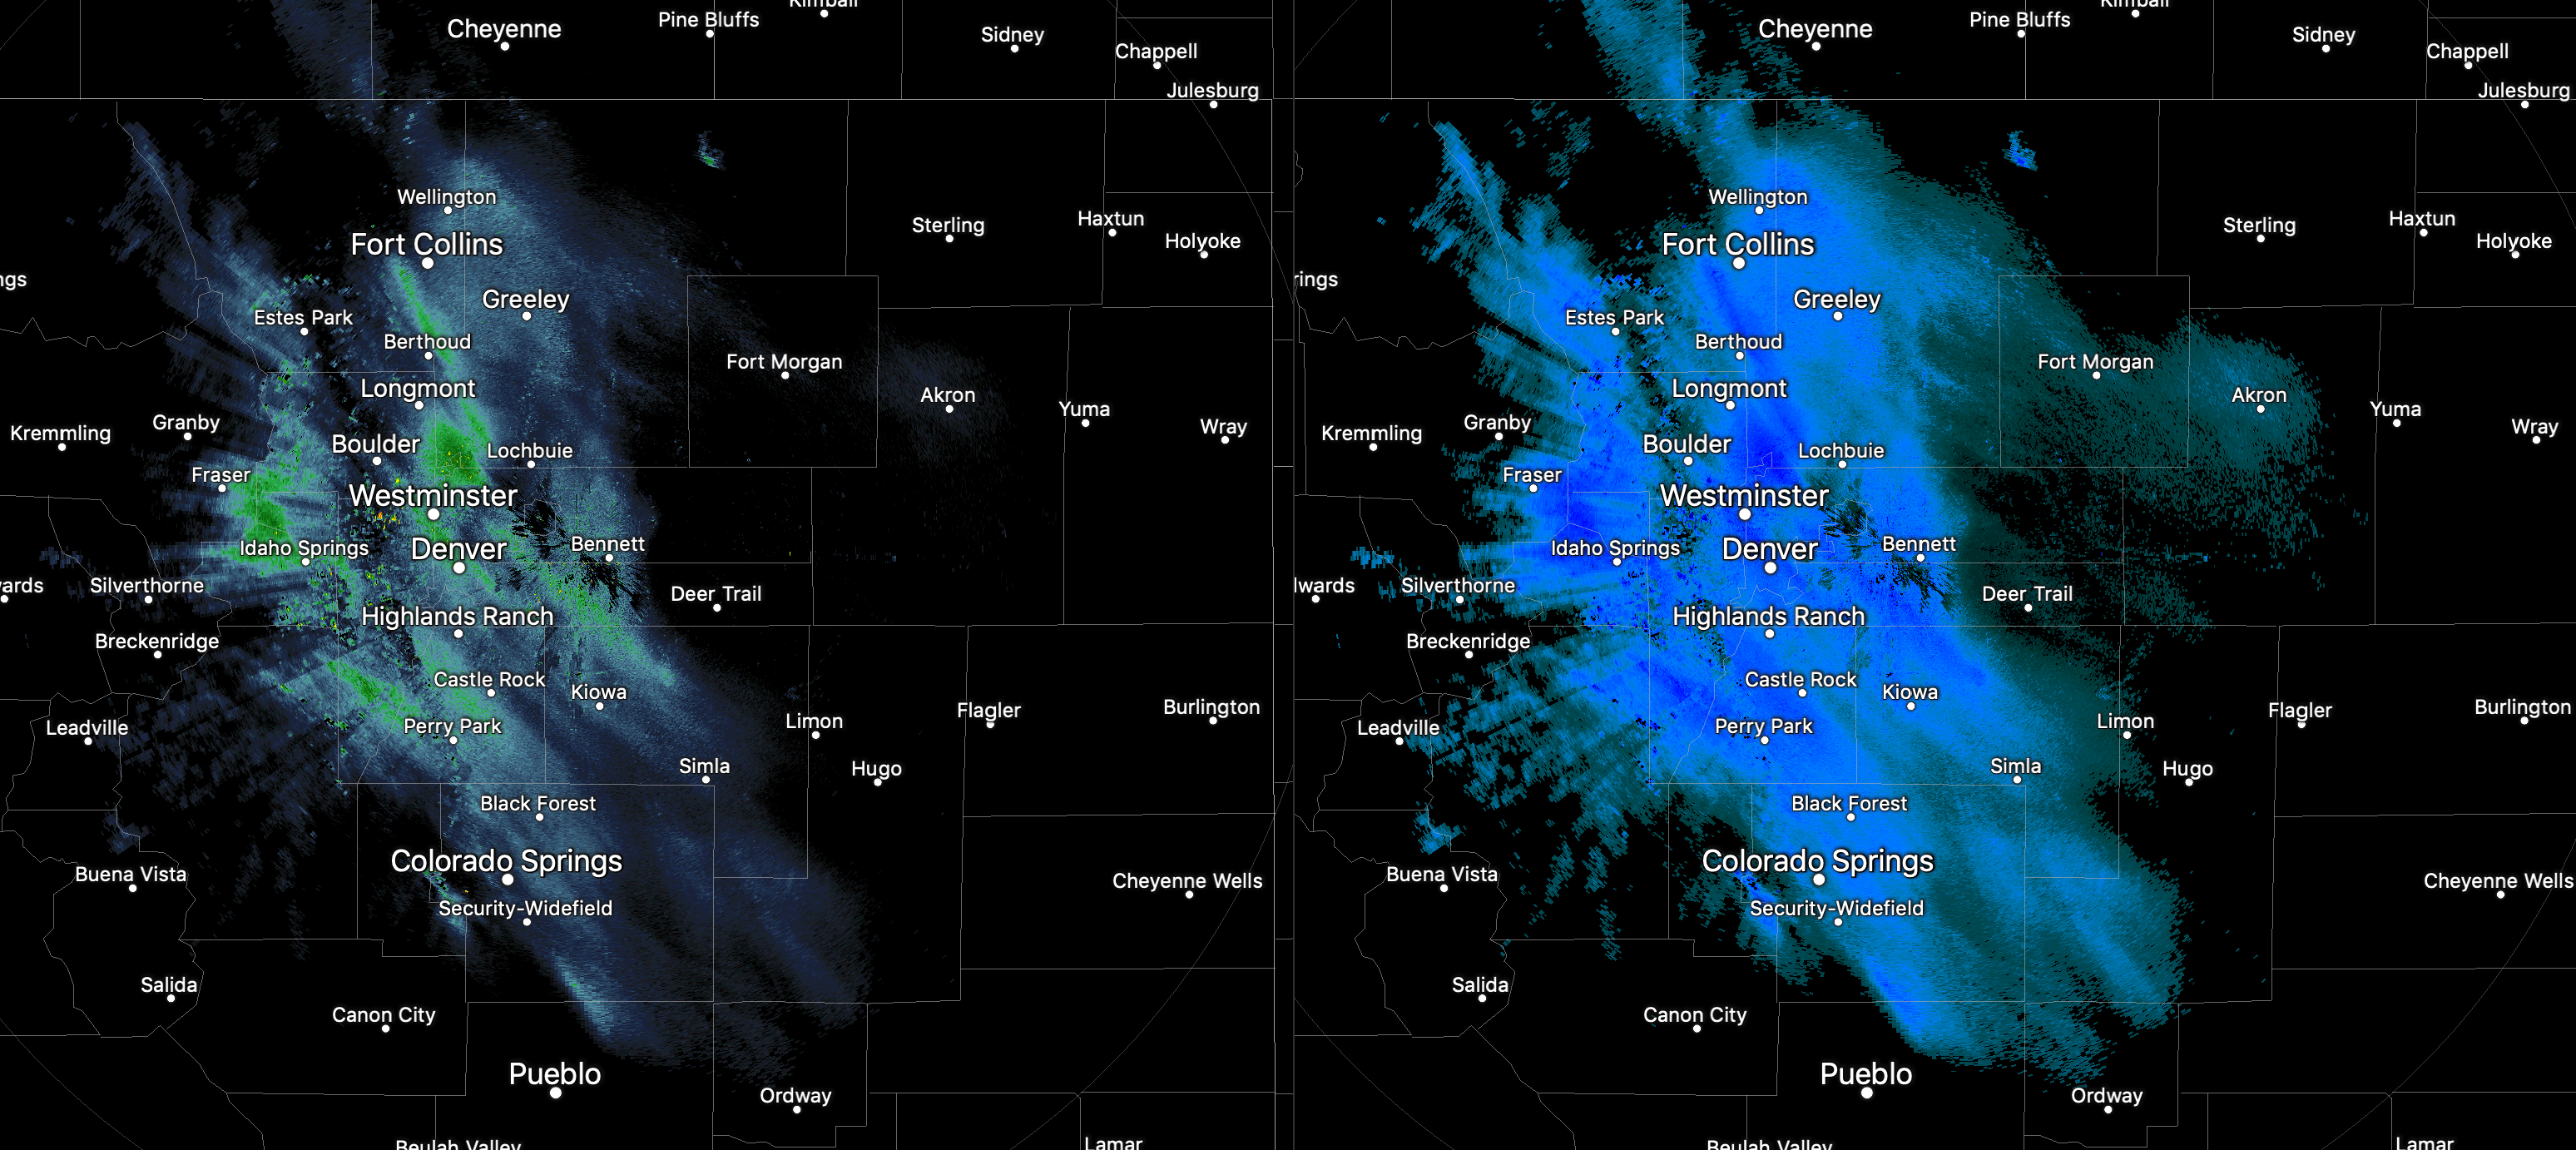 Radar as of 7 am showing snow picking up again along the Front Range